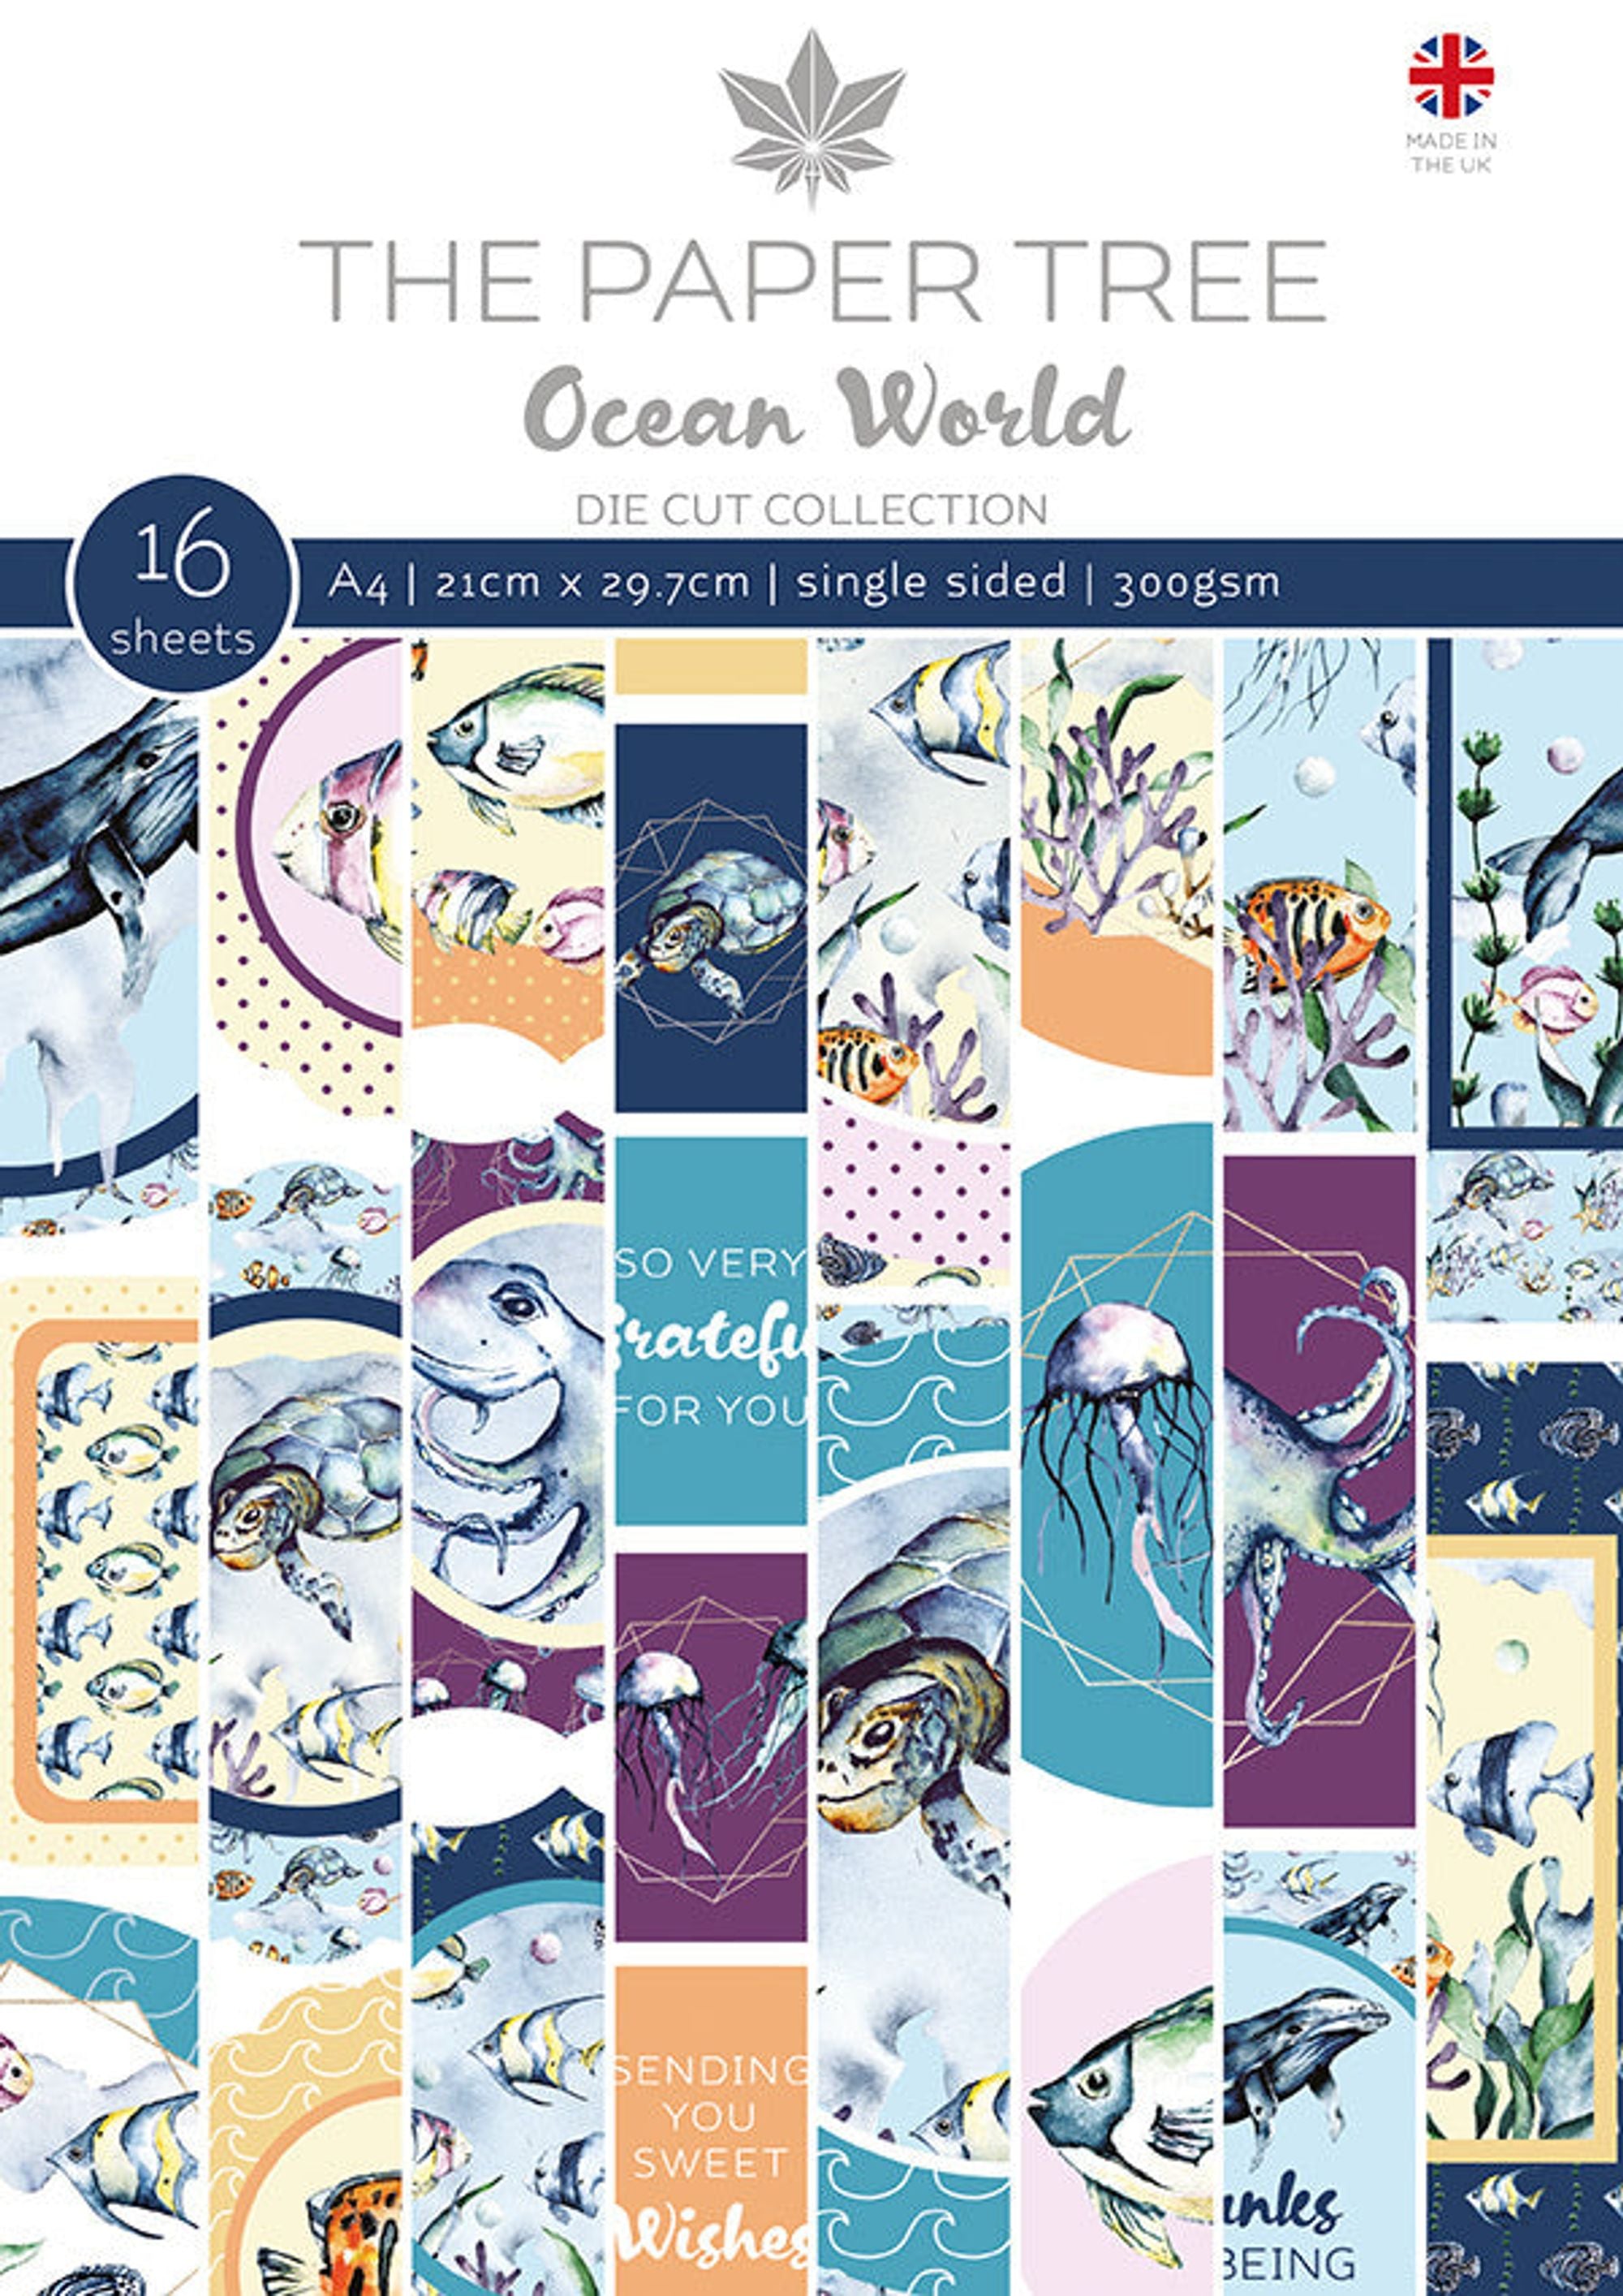 The Paper Tree Ocean World A4 Die Cut sheets